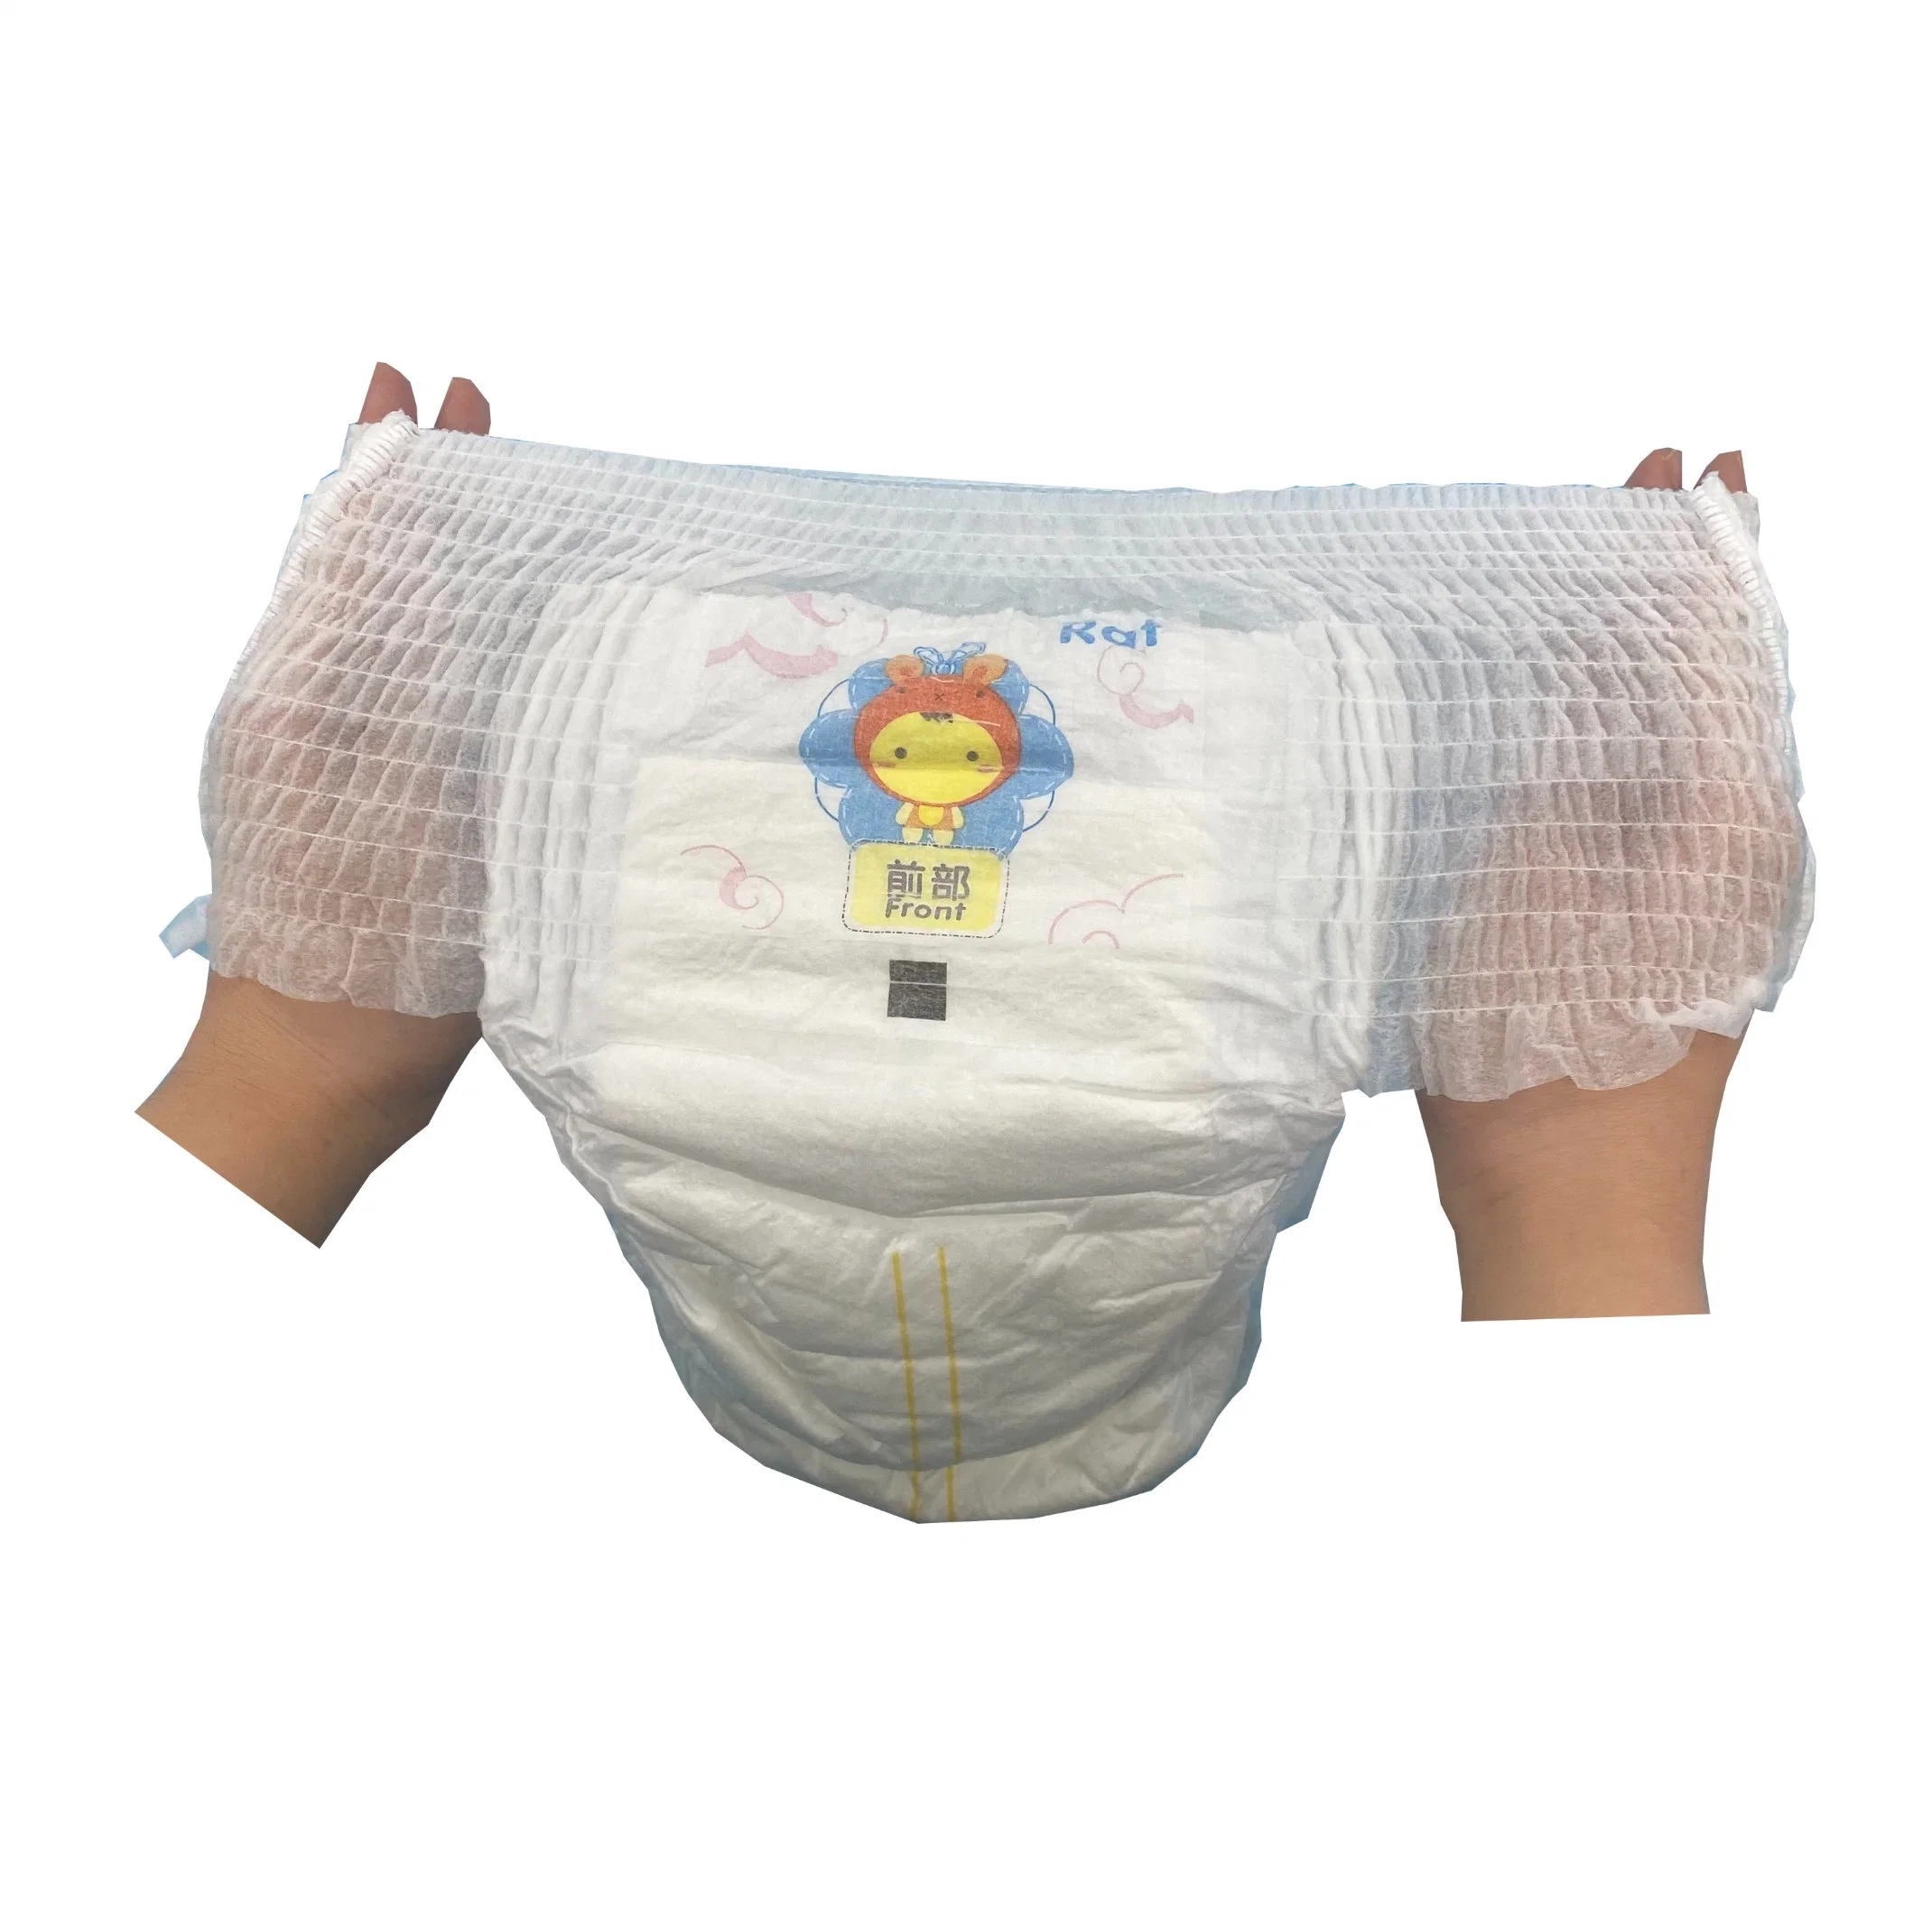 Disposable Baby Pants Diaper Baby Care Baby Products Wholesale Cheap Price in Bales